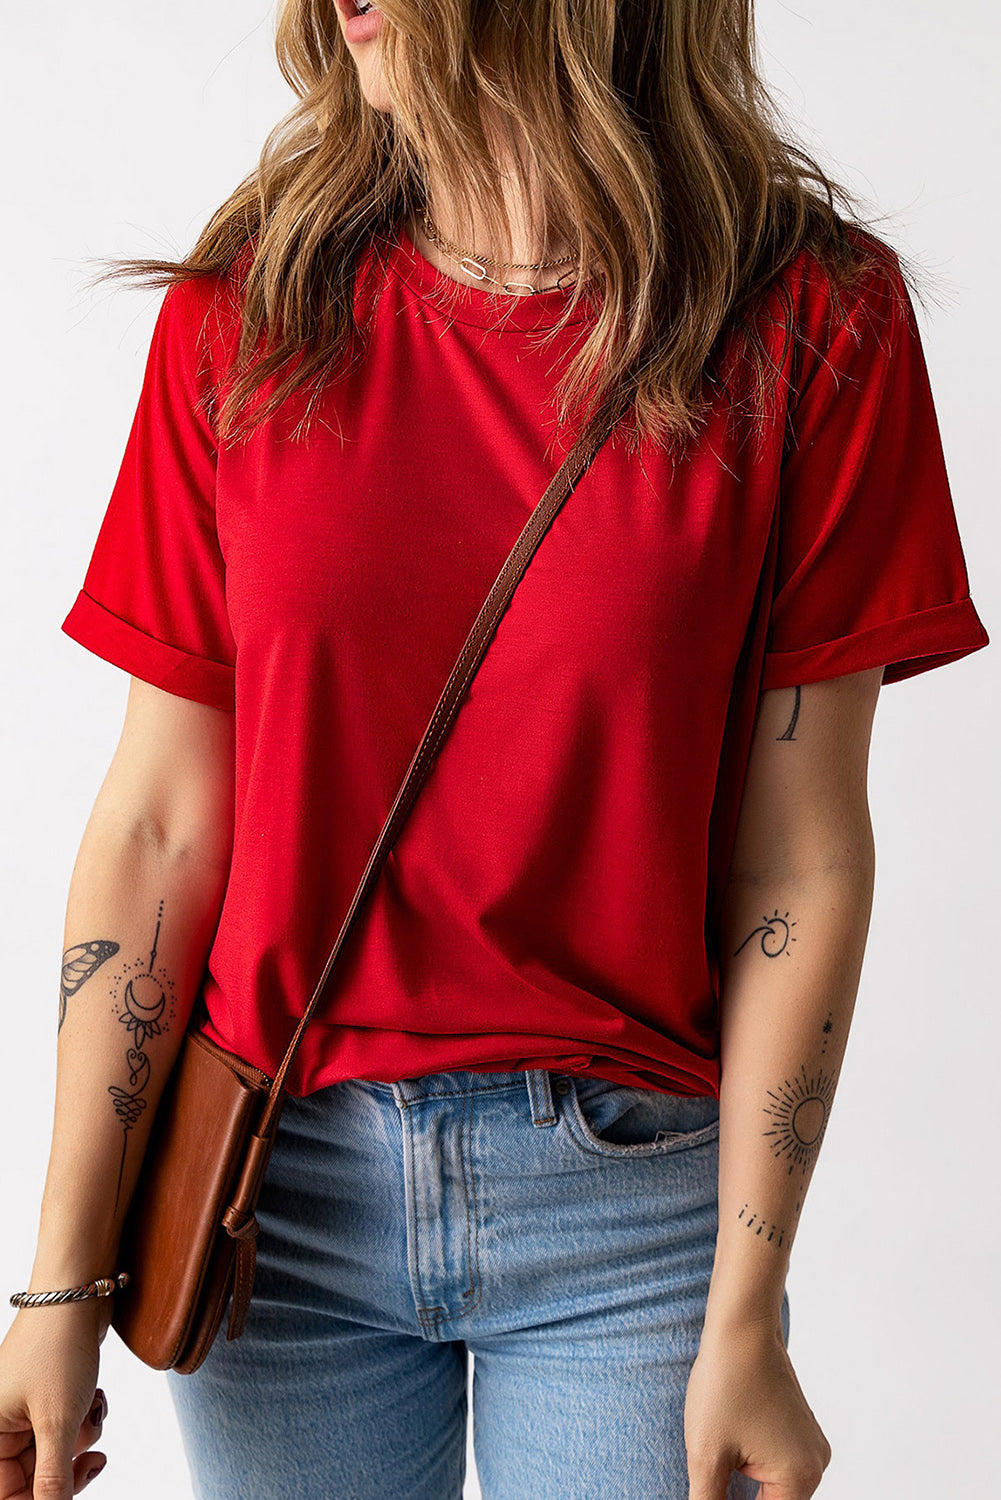 Blank T Shirt - Red Solid Color Basic Crew Neck Tee Customized